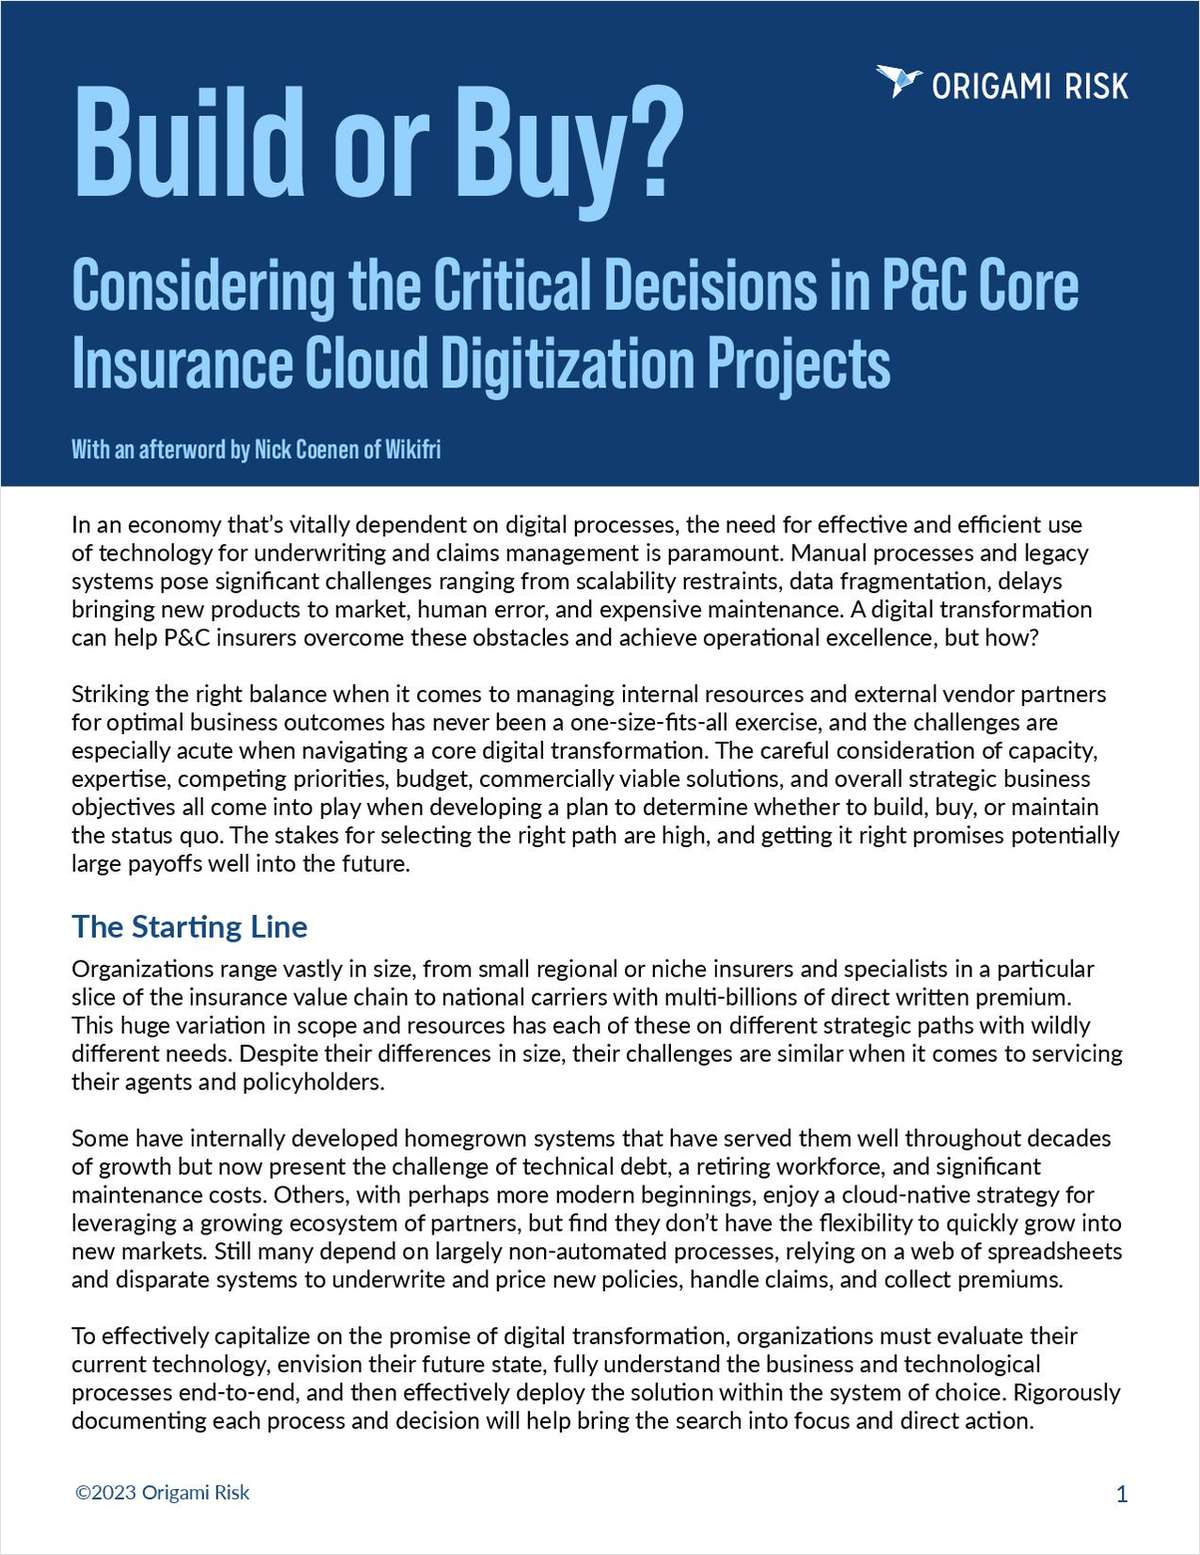 Build or Buy? Considering the Critical Decisions in P&C Core Insurance Cloud Digitization Projects